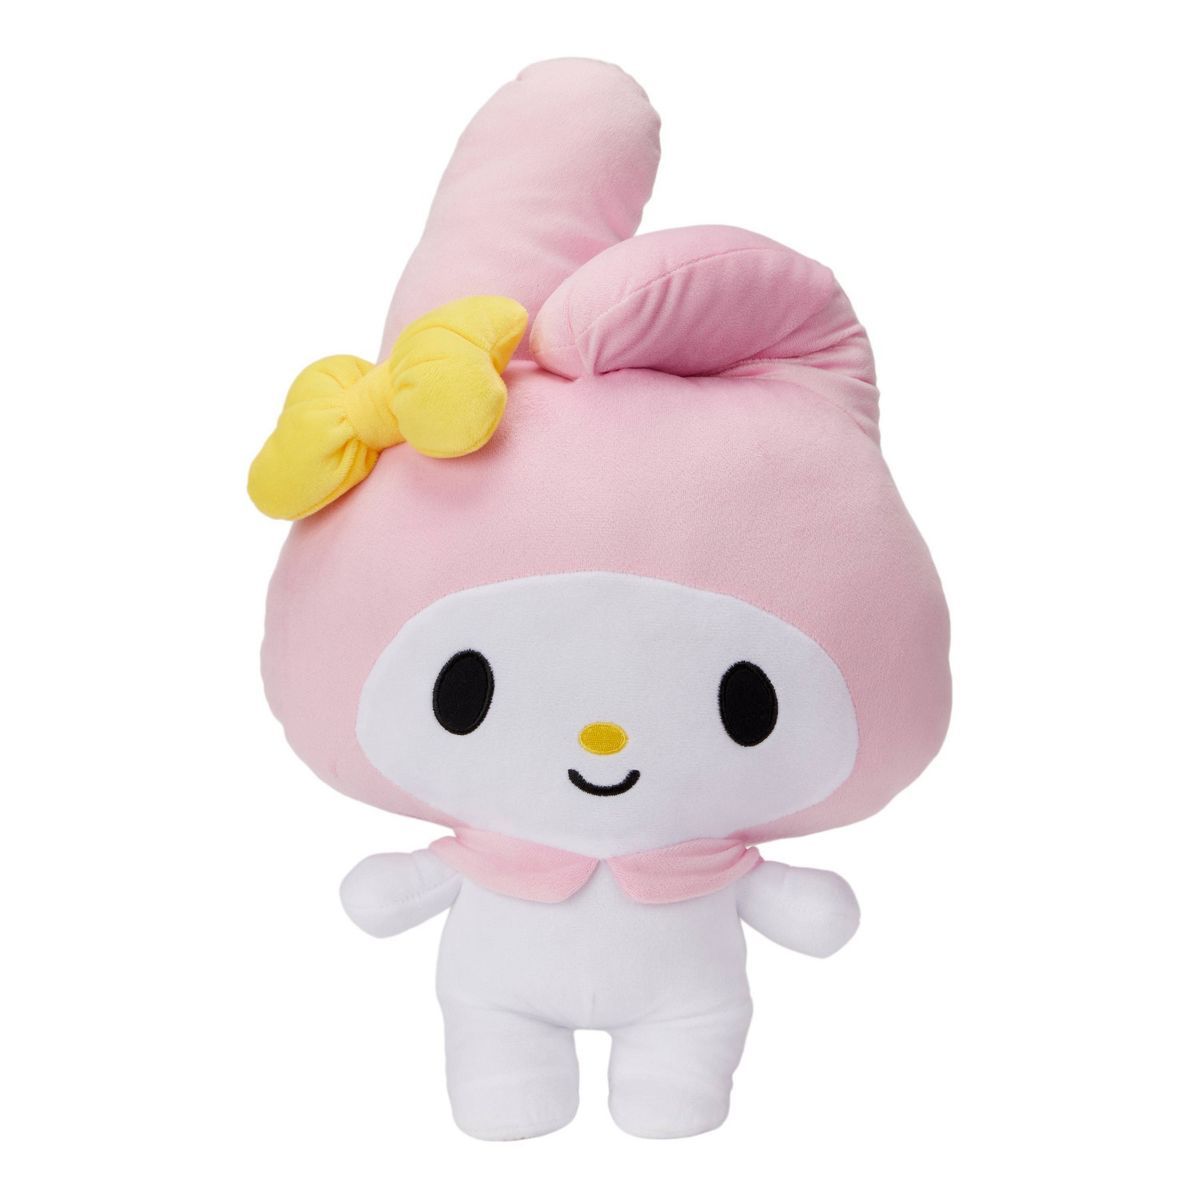 Hello Kitty Pillow Buddy My Melody | Target